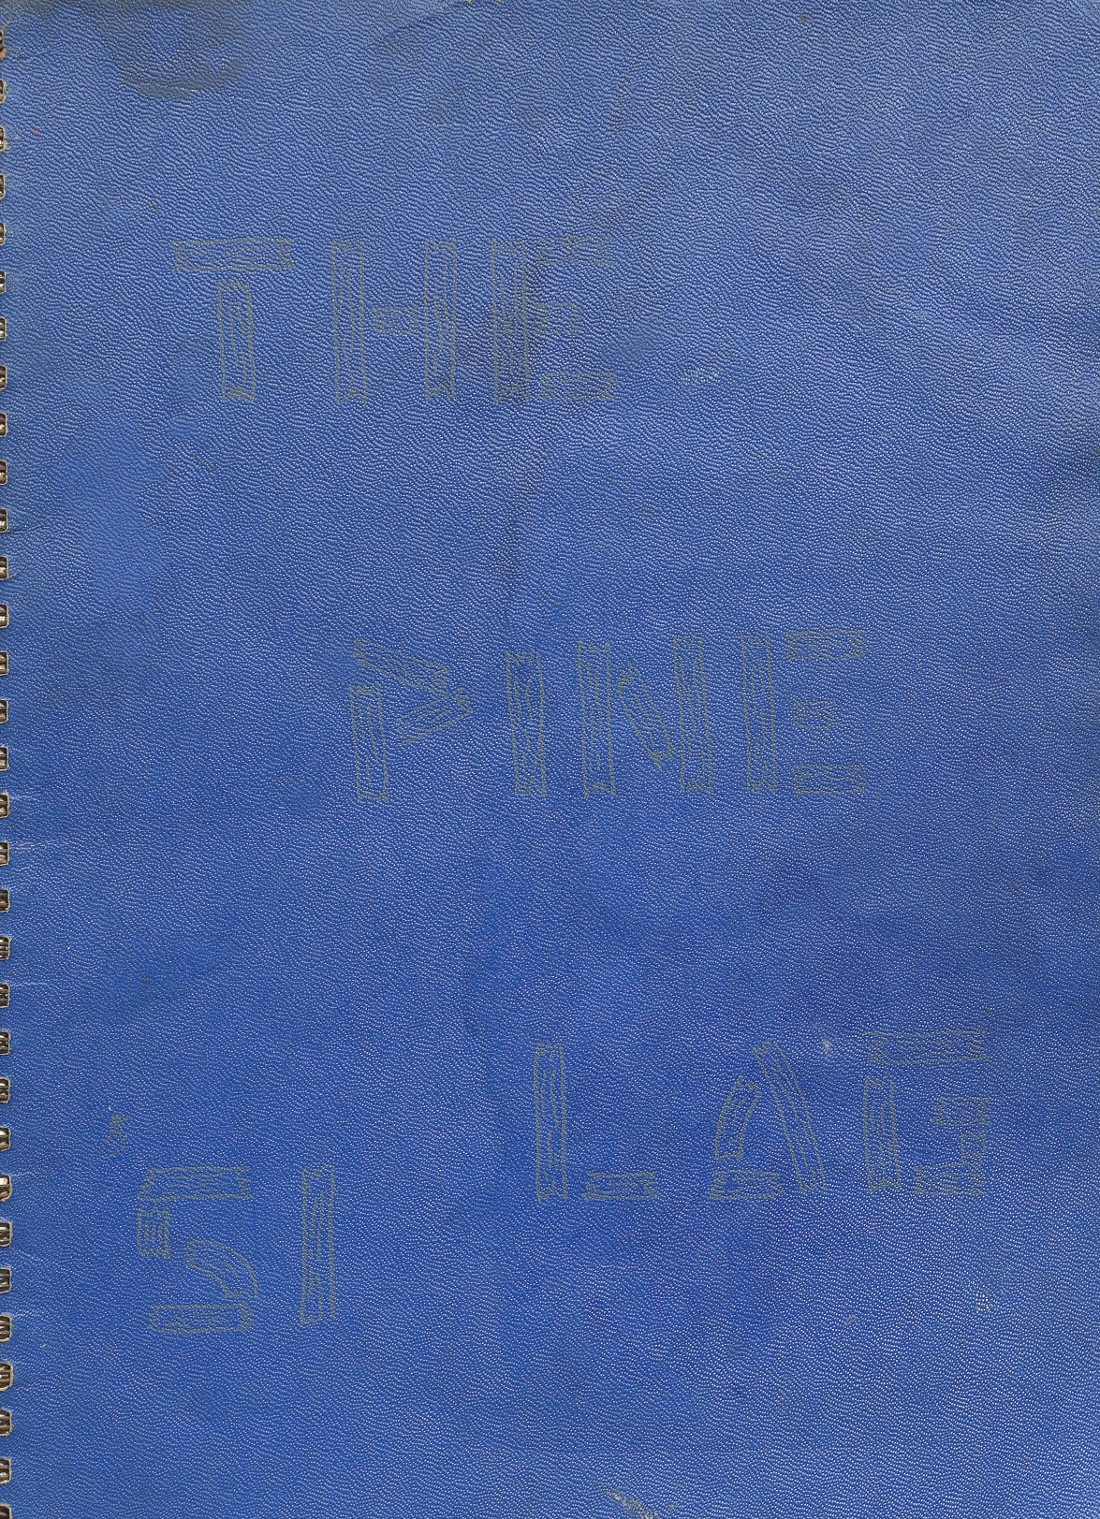 1951 yearbook from Pine Plains Central School from Pine plains, New